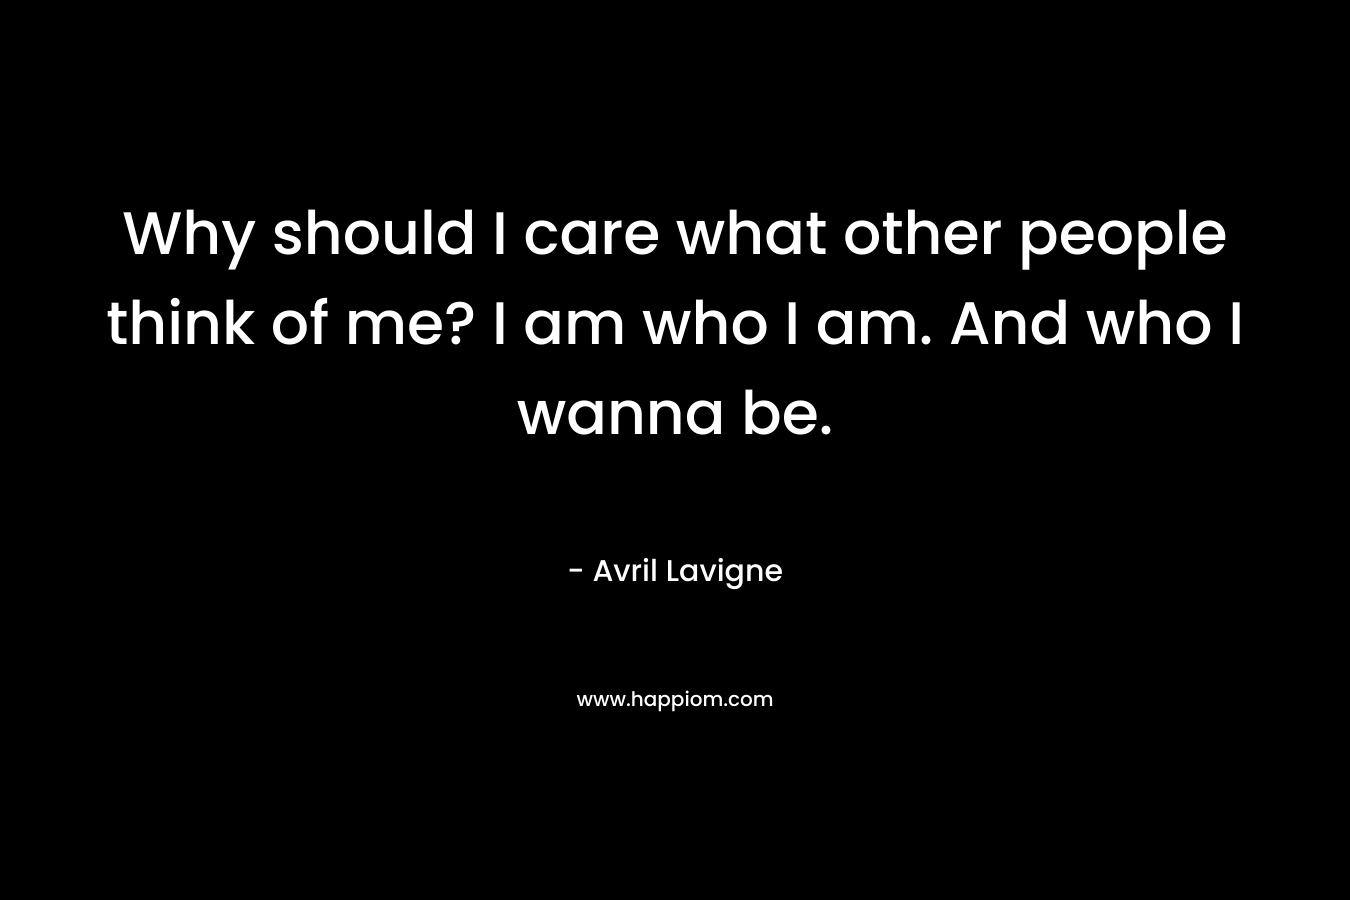 Why should I care what other people think of me? I am who I am. And who I wanna be. – Avril Lavigne